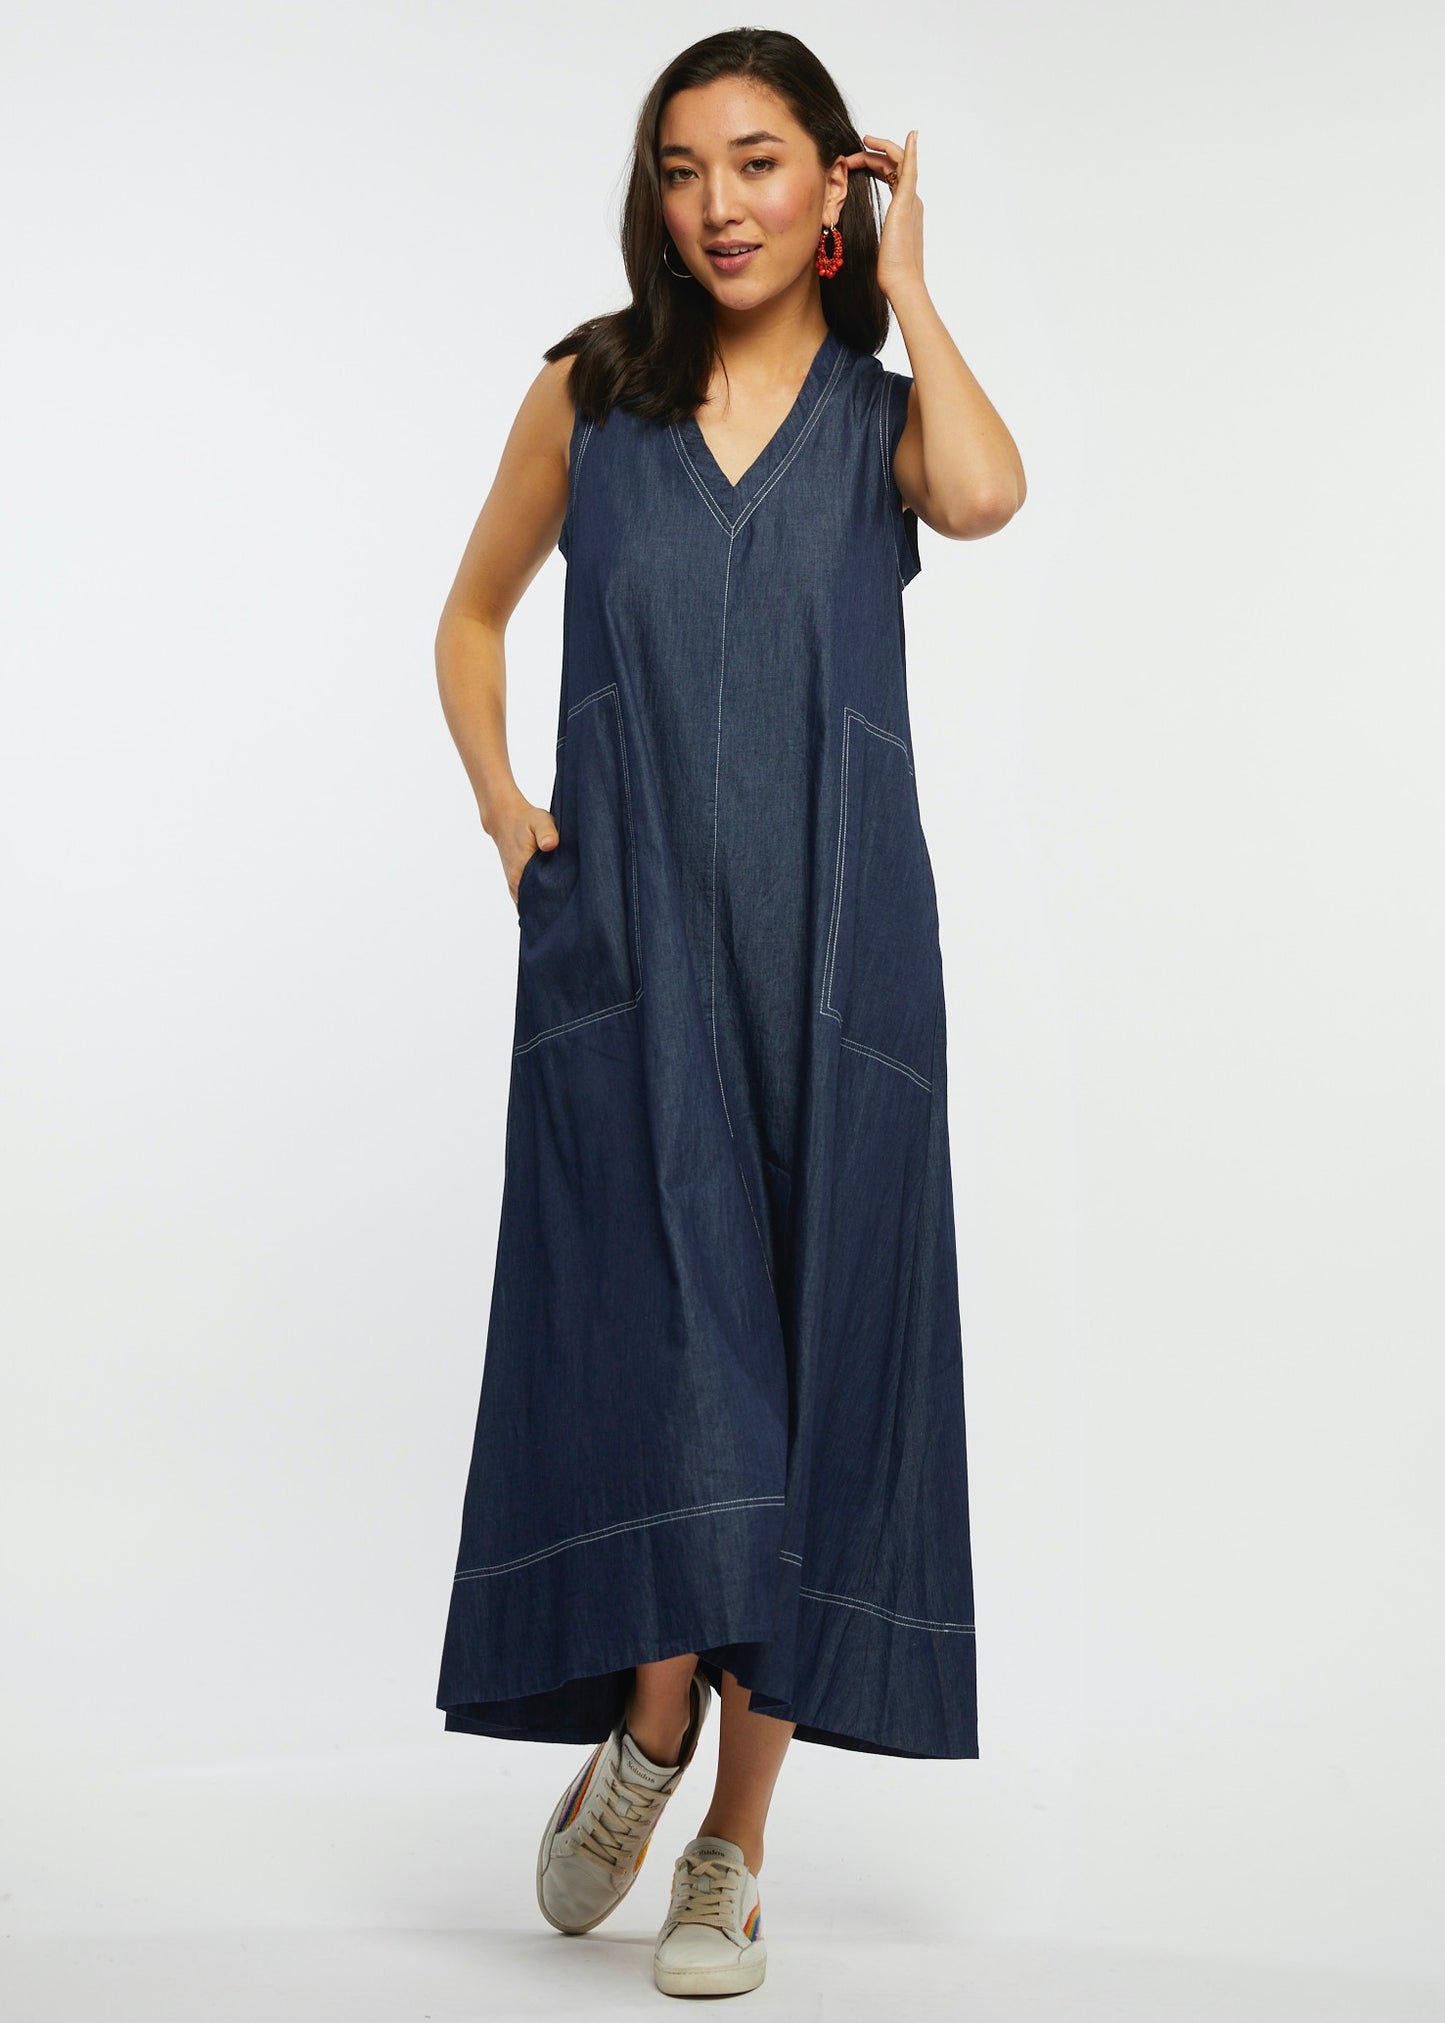 Denim Dress by Zaket and Plover